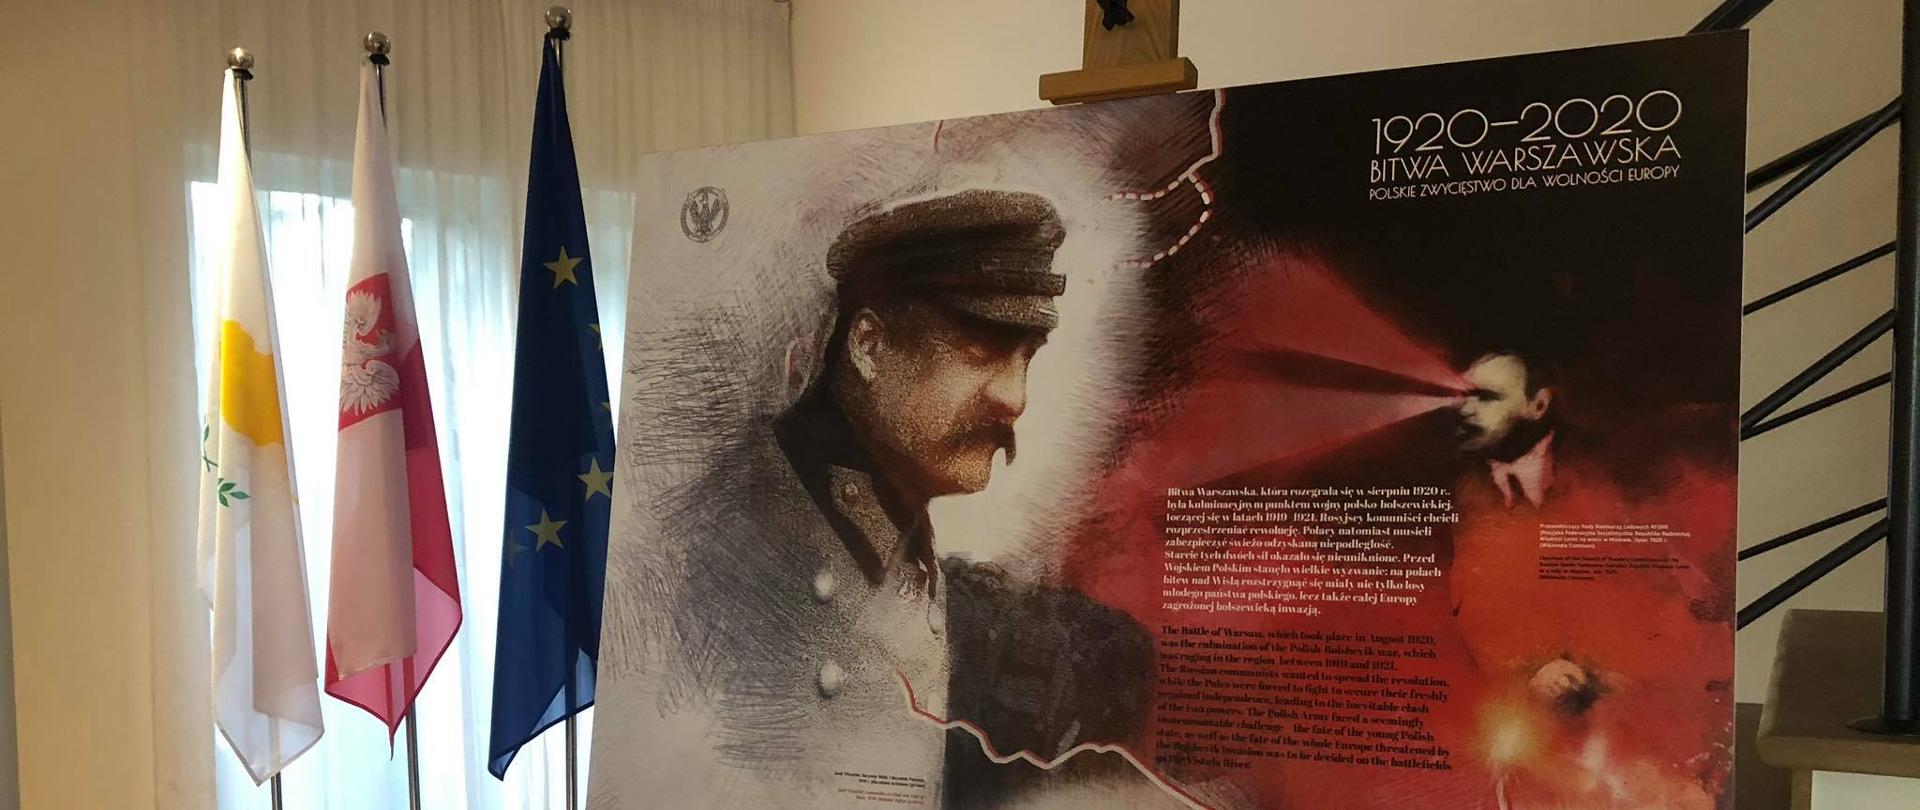 Exhibition commemorating the 100th anniversary of the Battle of Warsaw